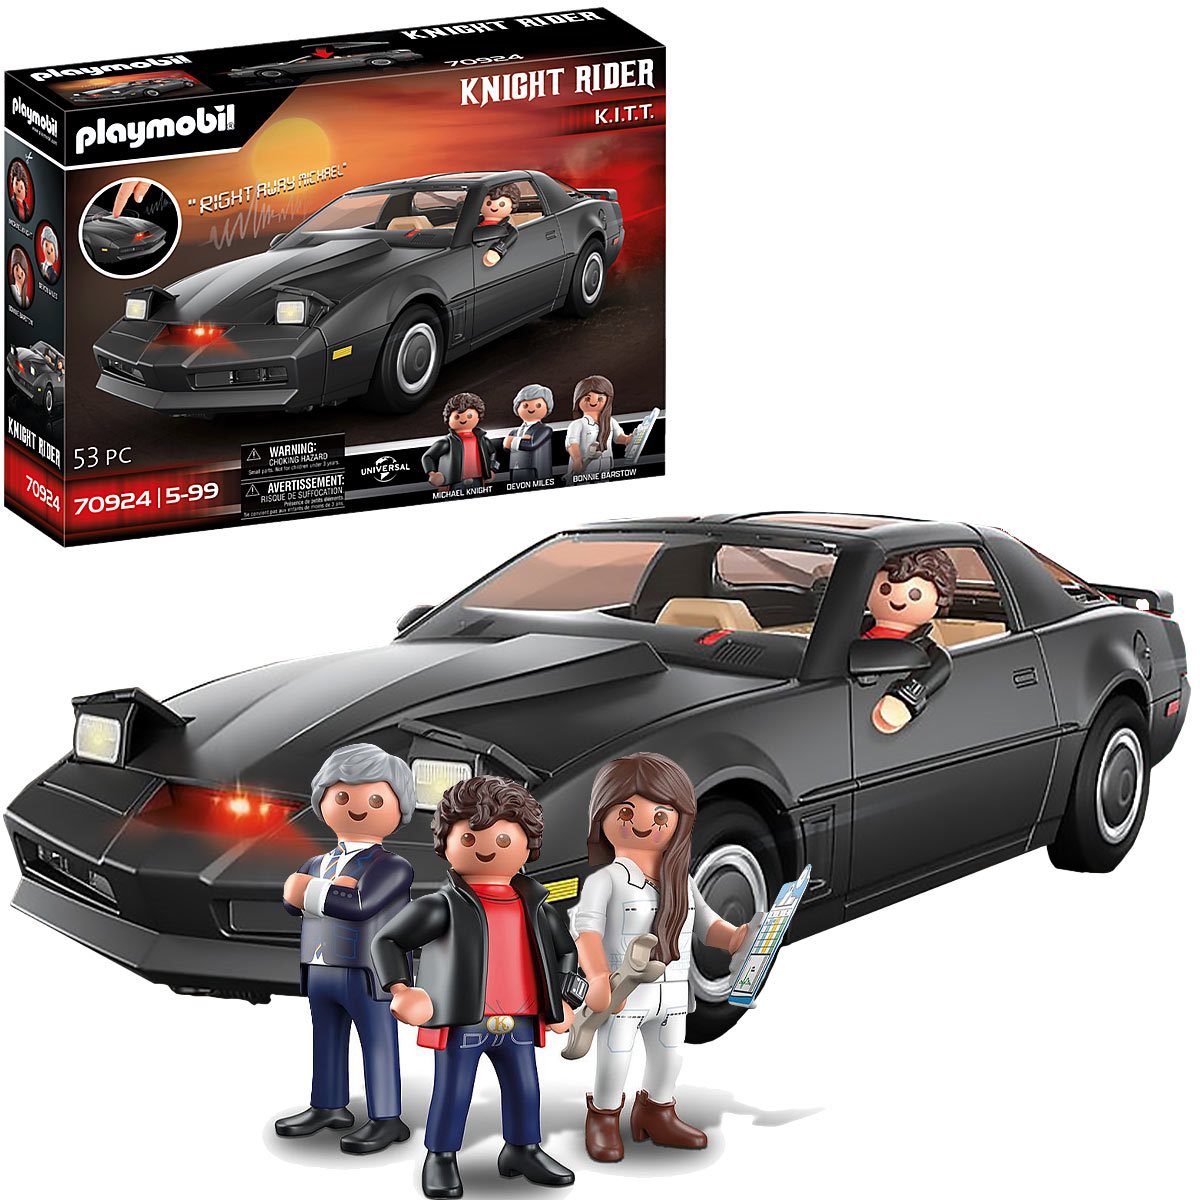 Playmobil 70924 Knight Rider .T. with Figures